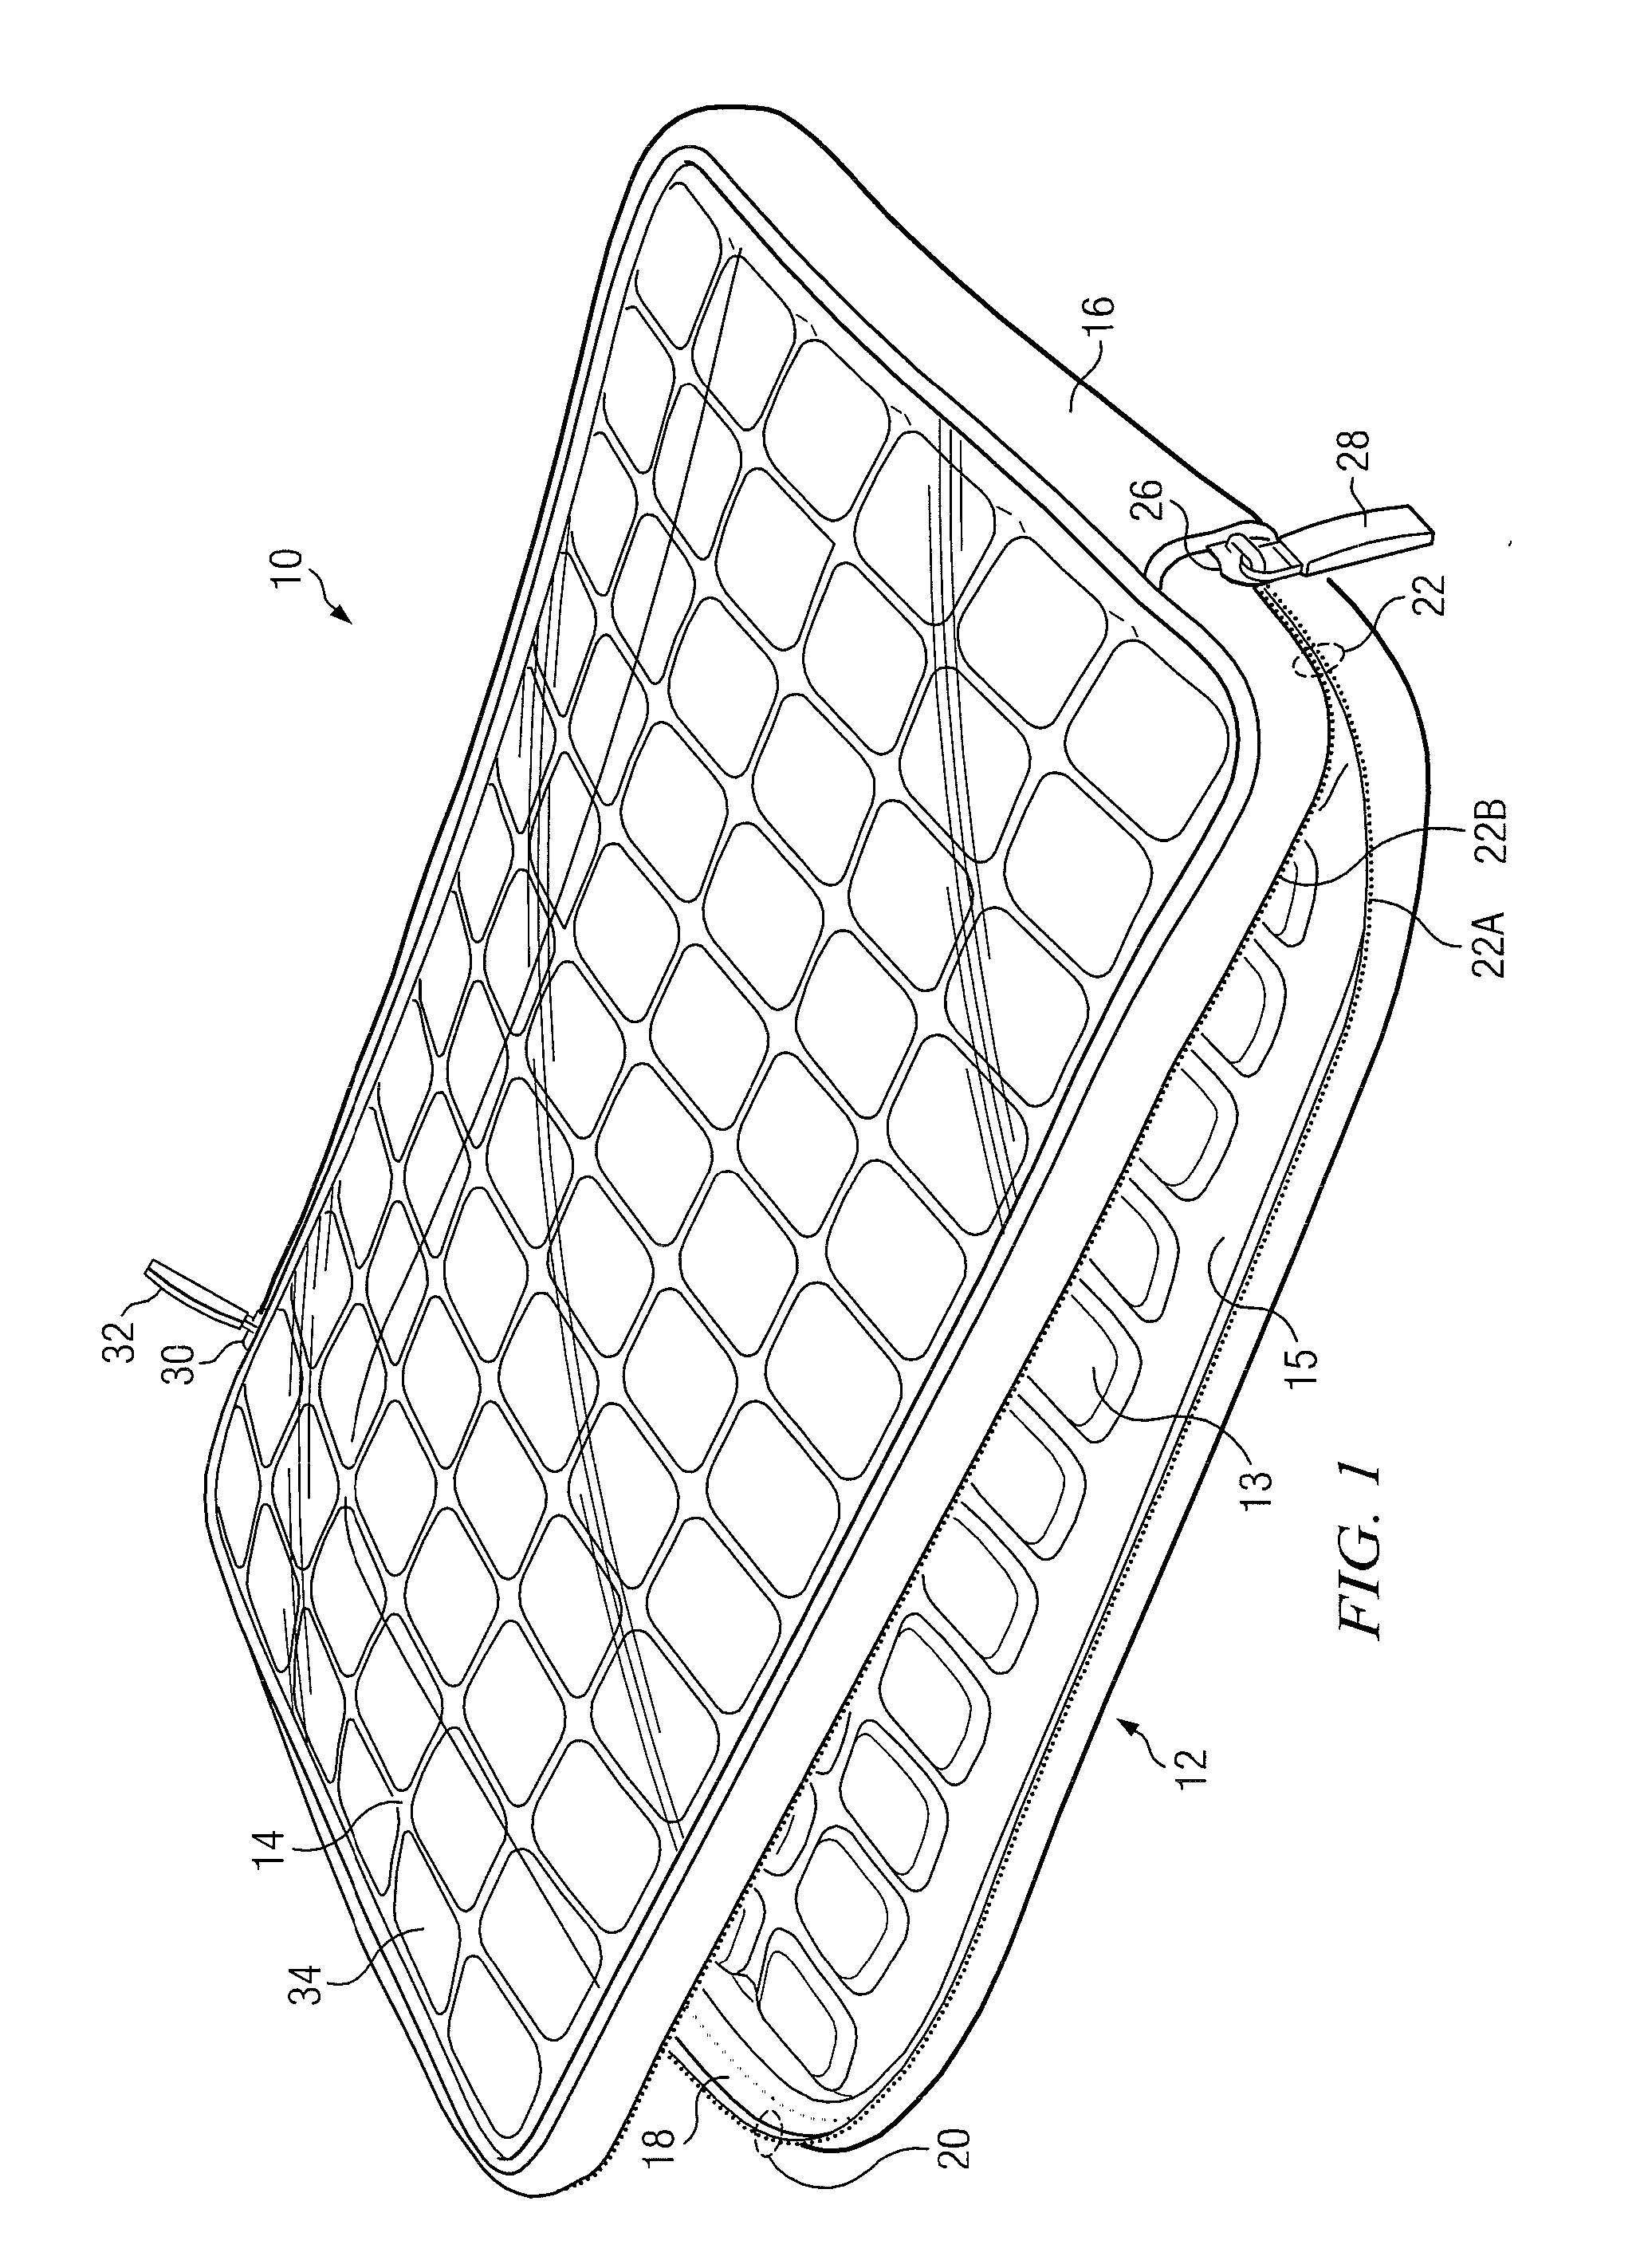 Transparent Carrying Case for Portable Electronic Devices